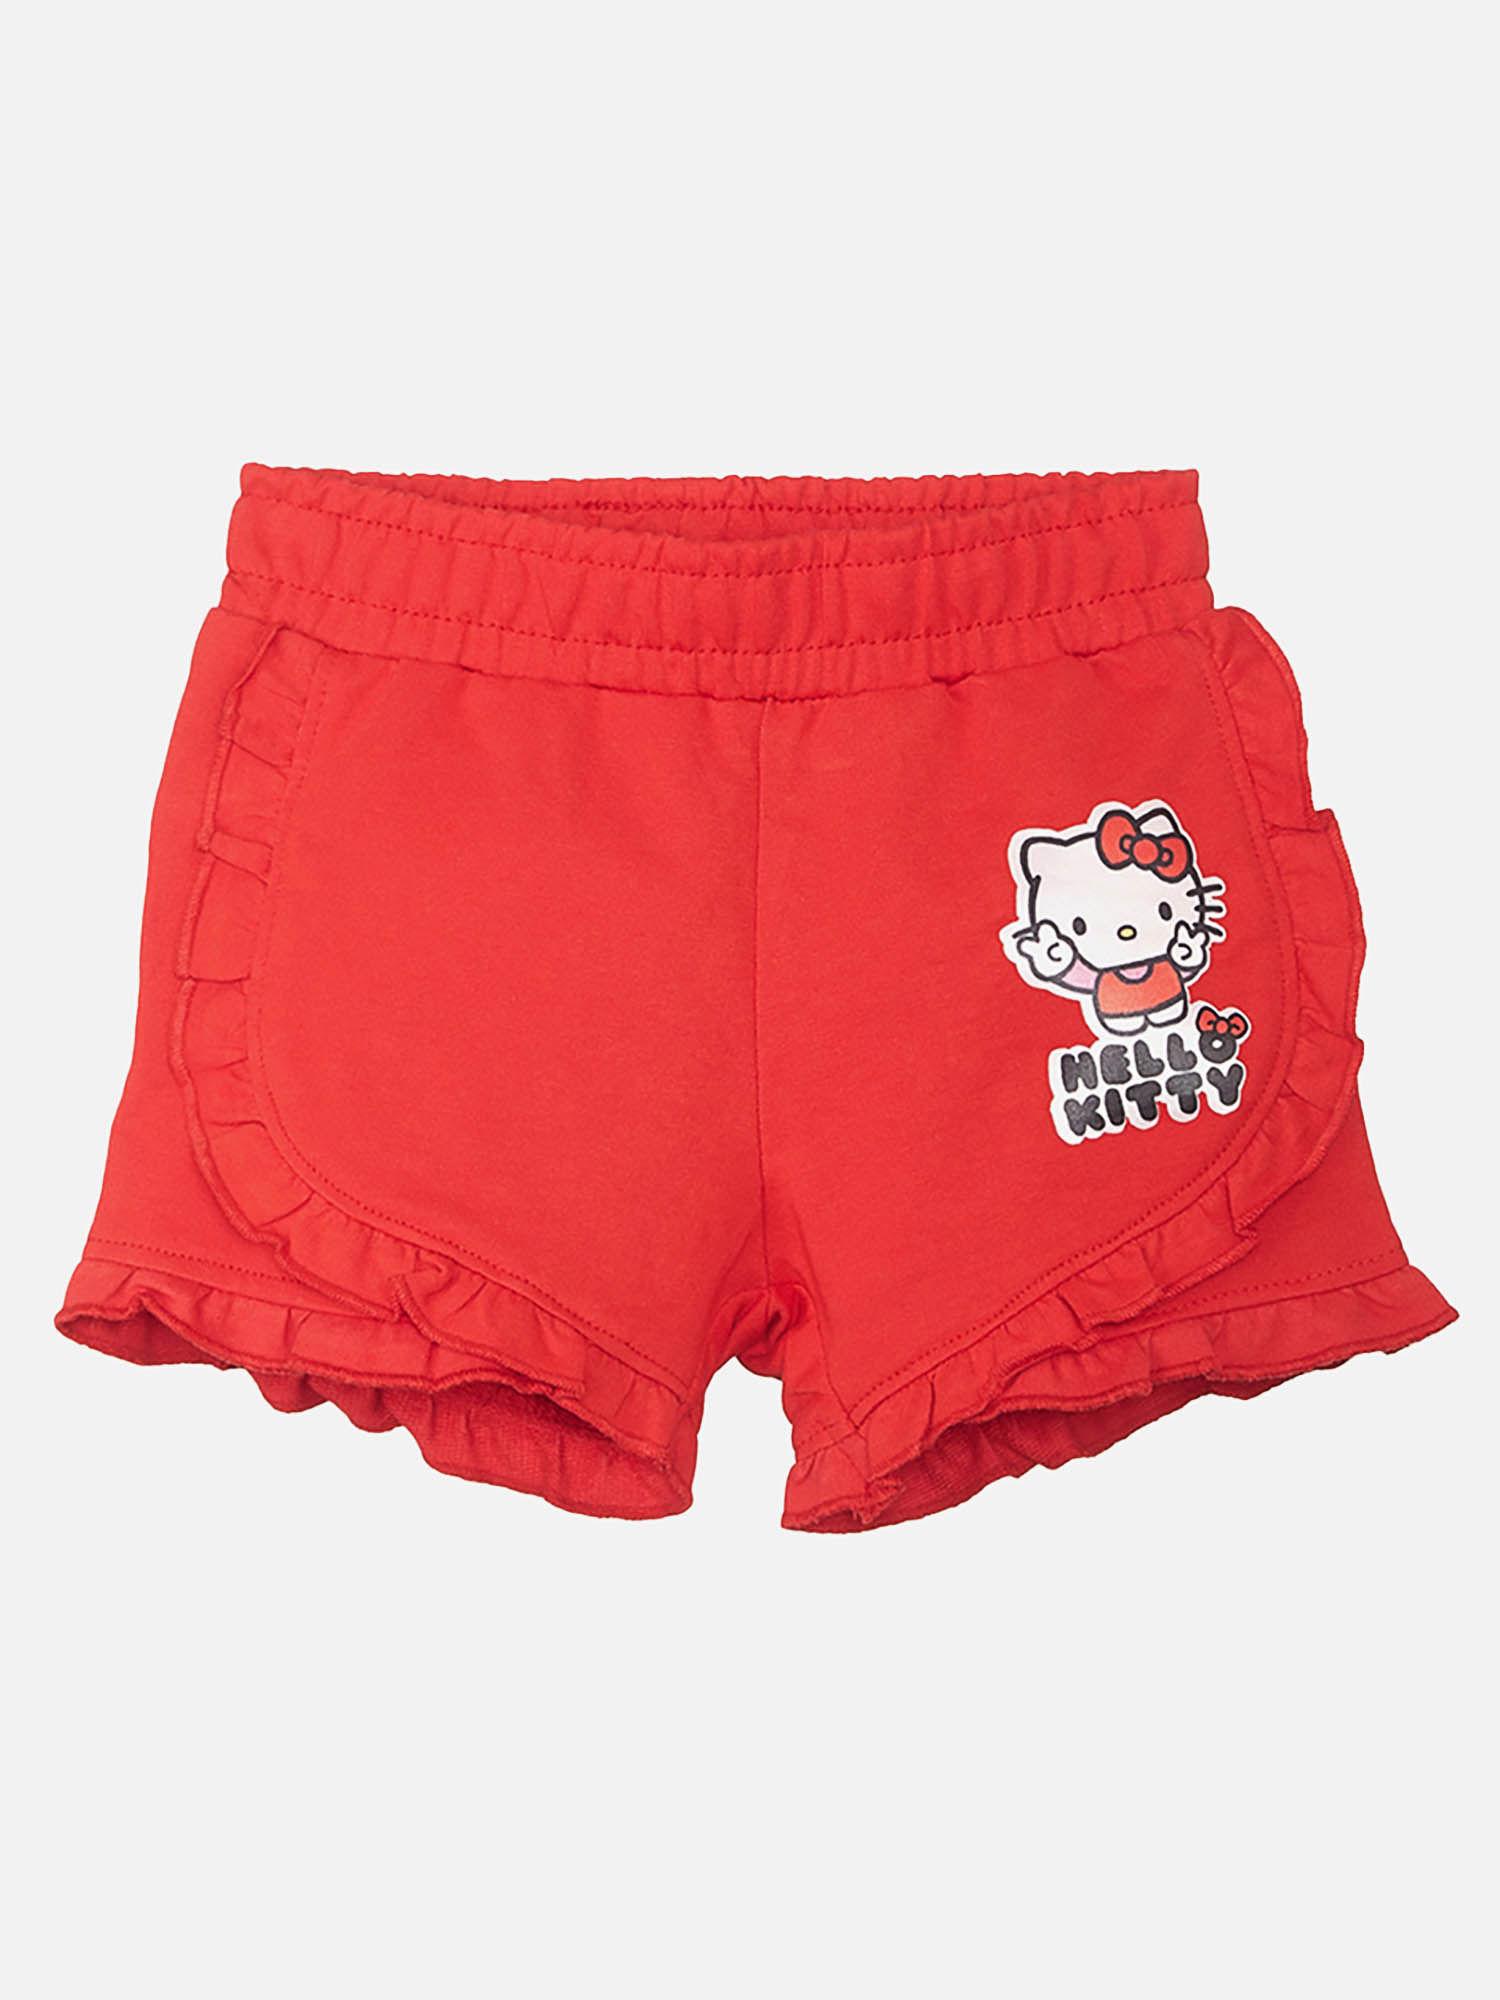 hello-kitty-featured-red-shorts-for-girls